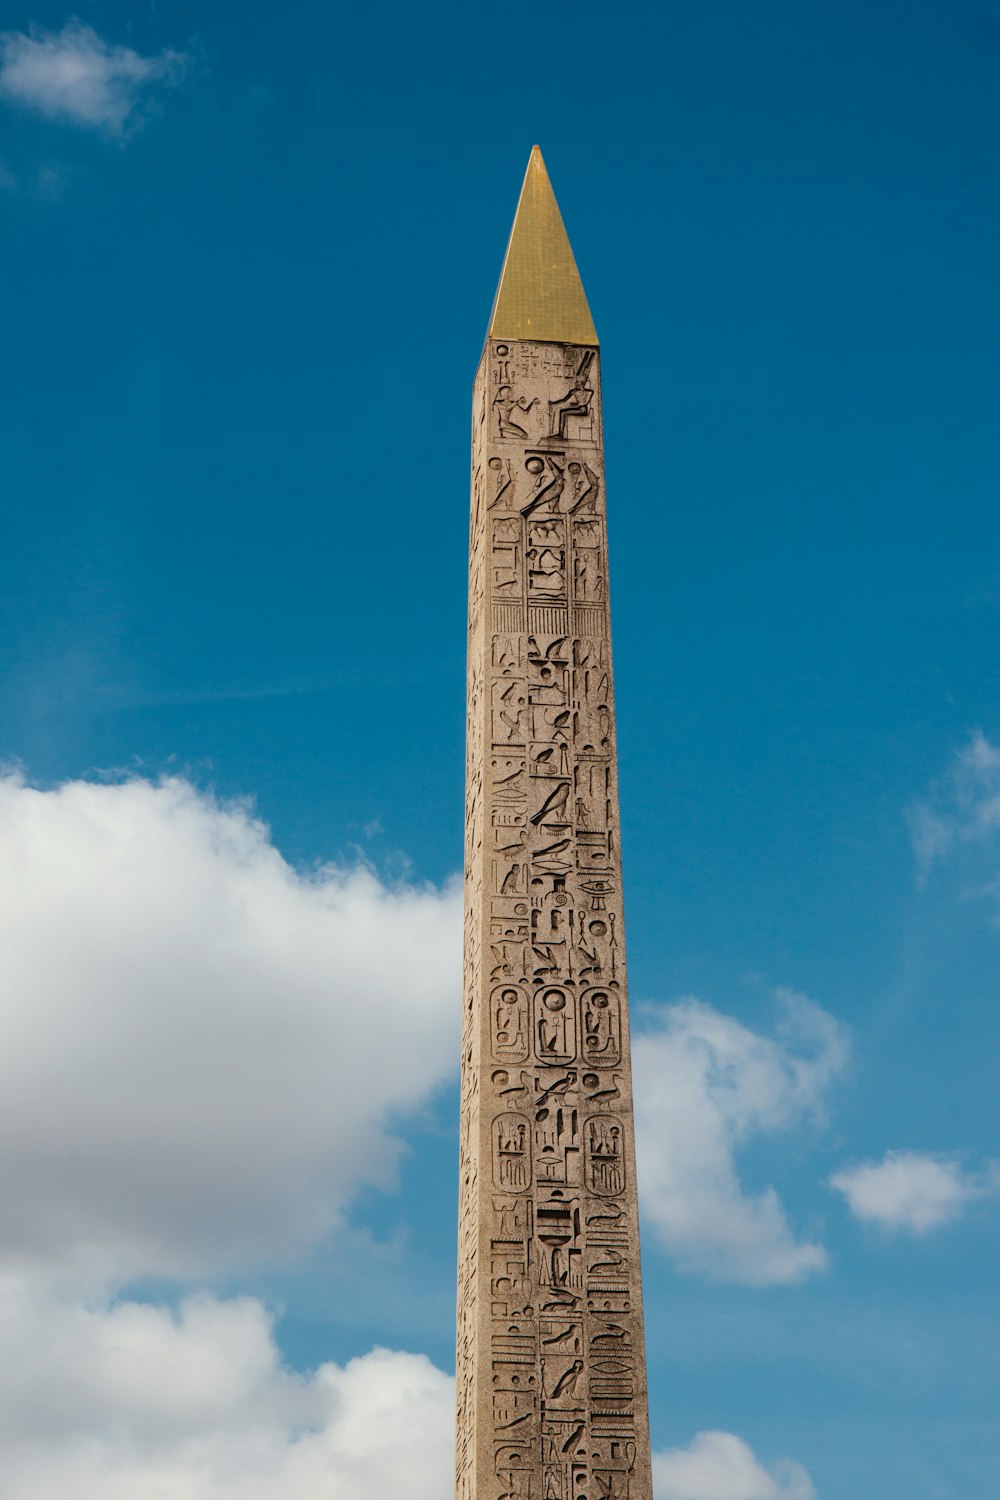 a tall obelisk with egyptian writing on it